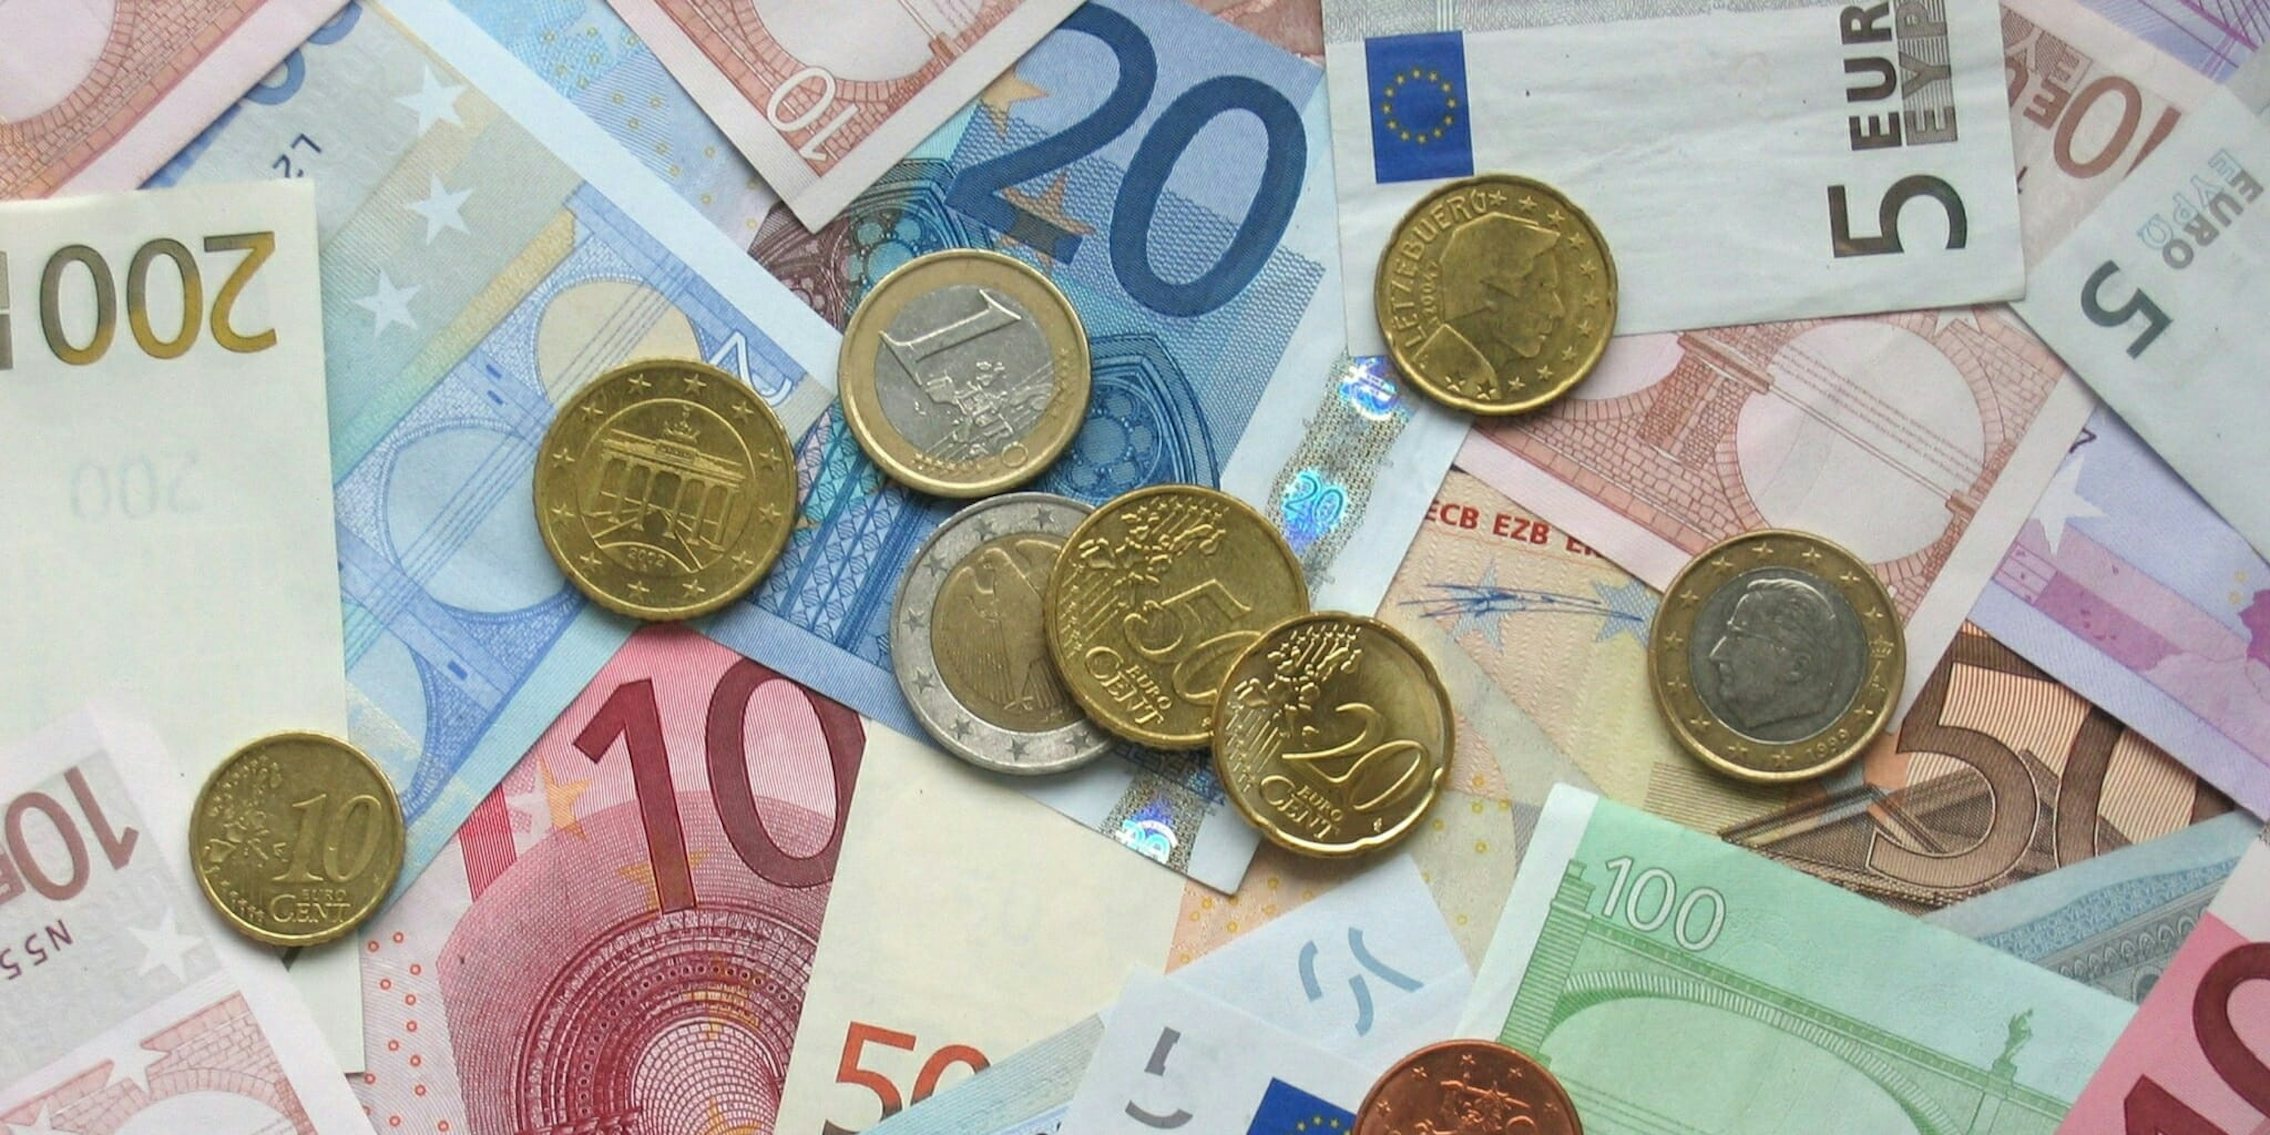 Euro coins and banknotes in a pile.